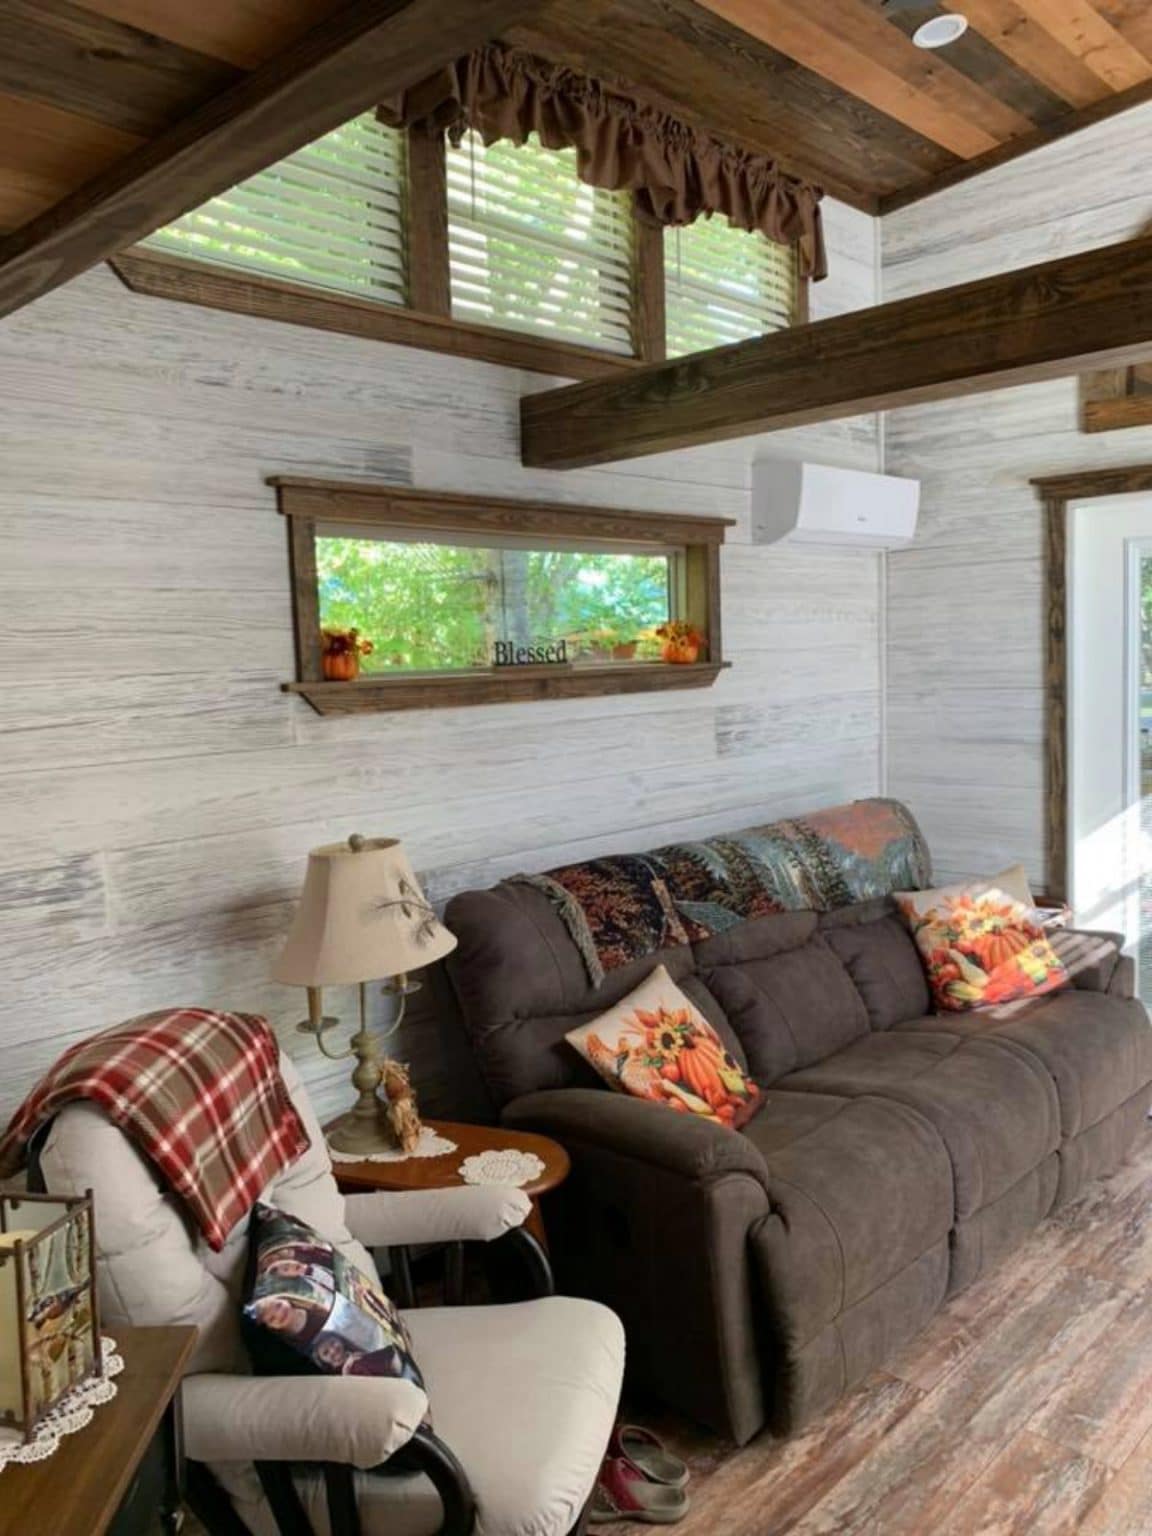 This Rustic Tiny Cabin is Beautifully Decorated by Its New Owners - Tiny Houses